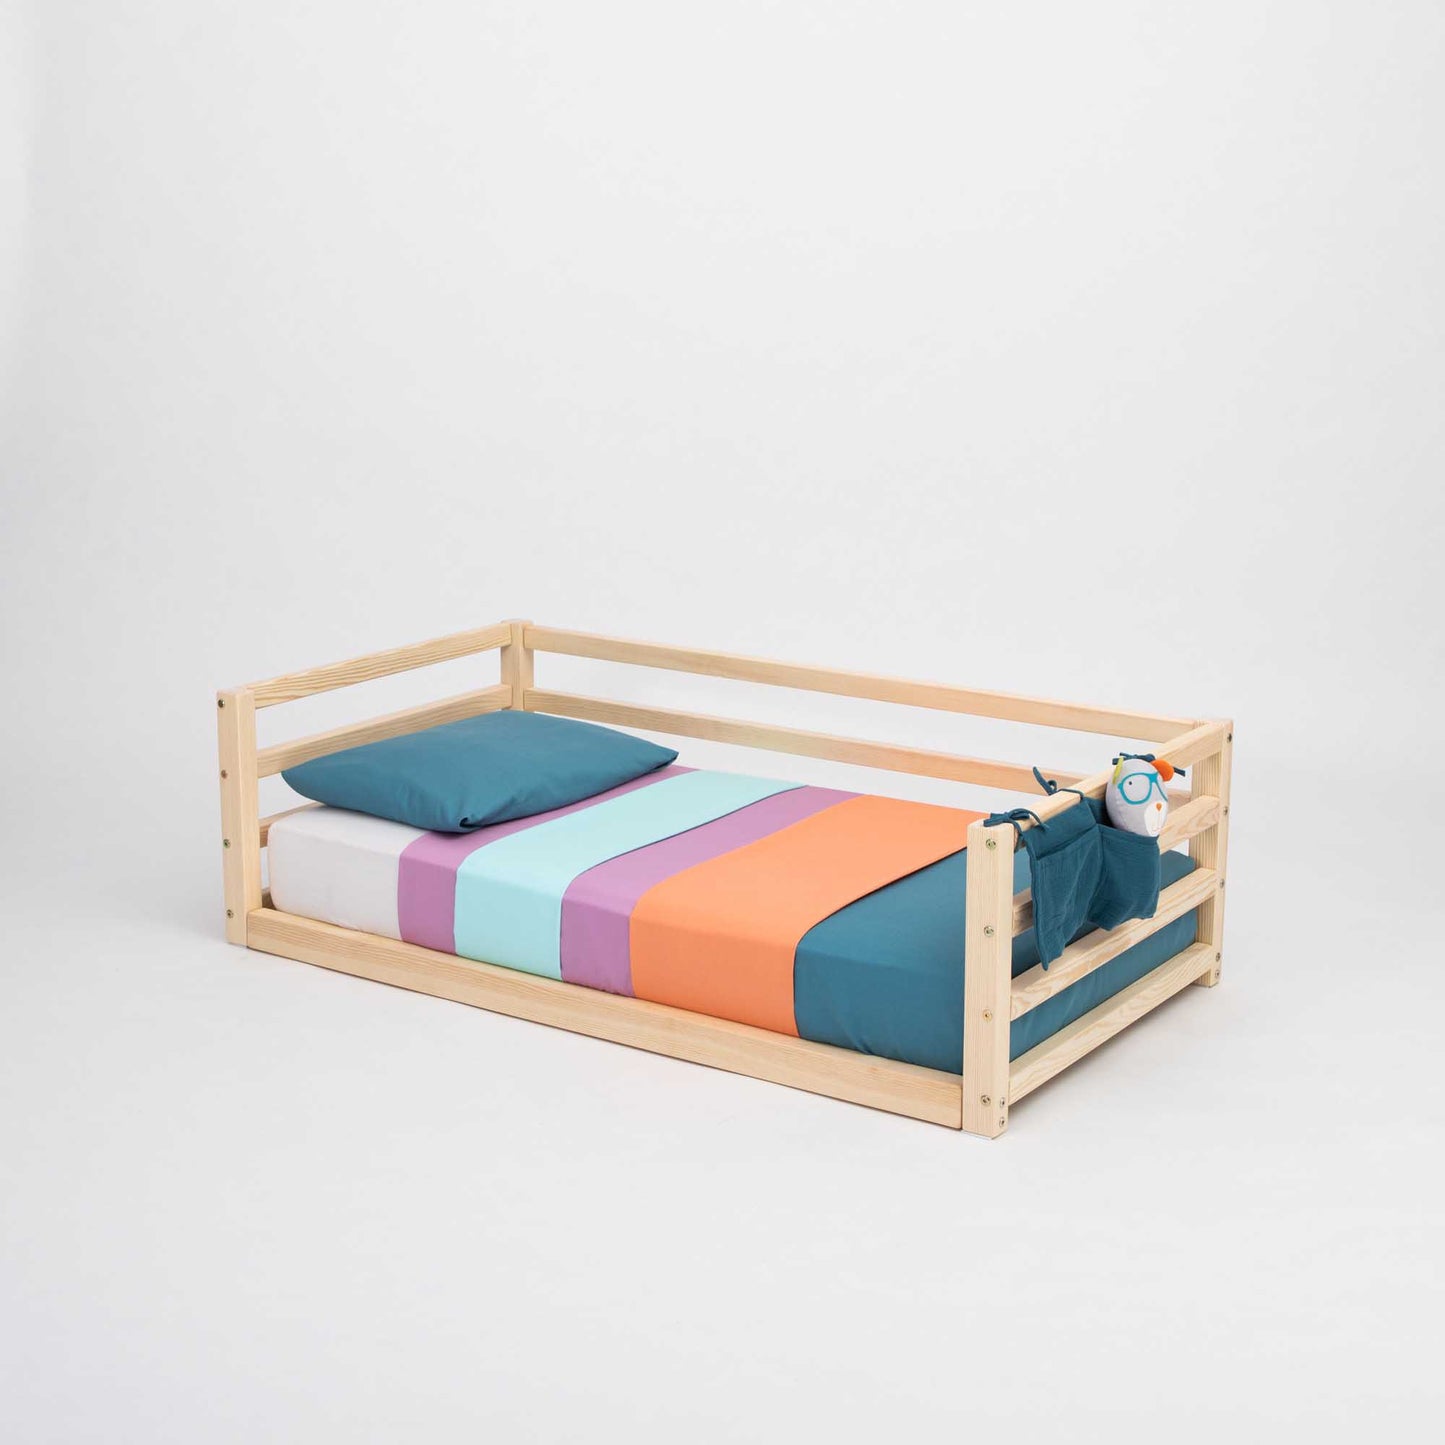 Children's floor level bed with 3-sided safety rail